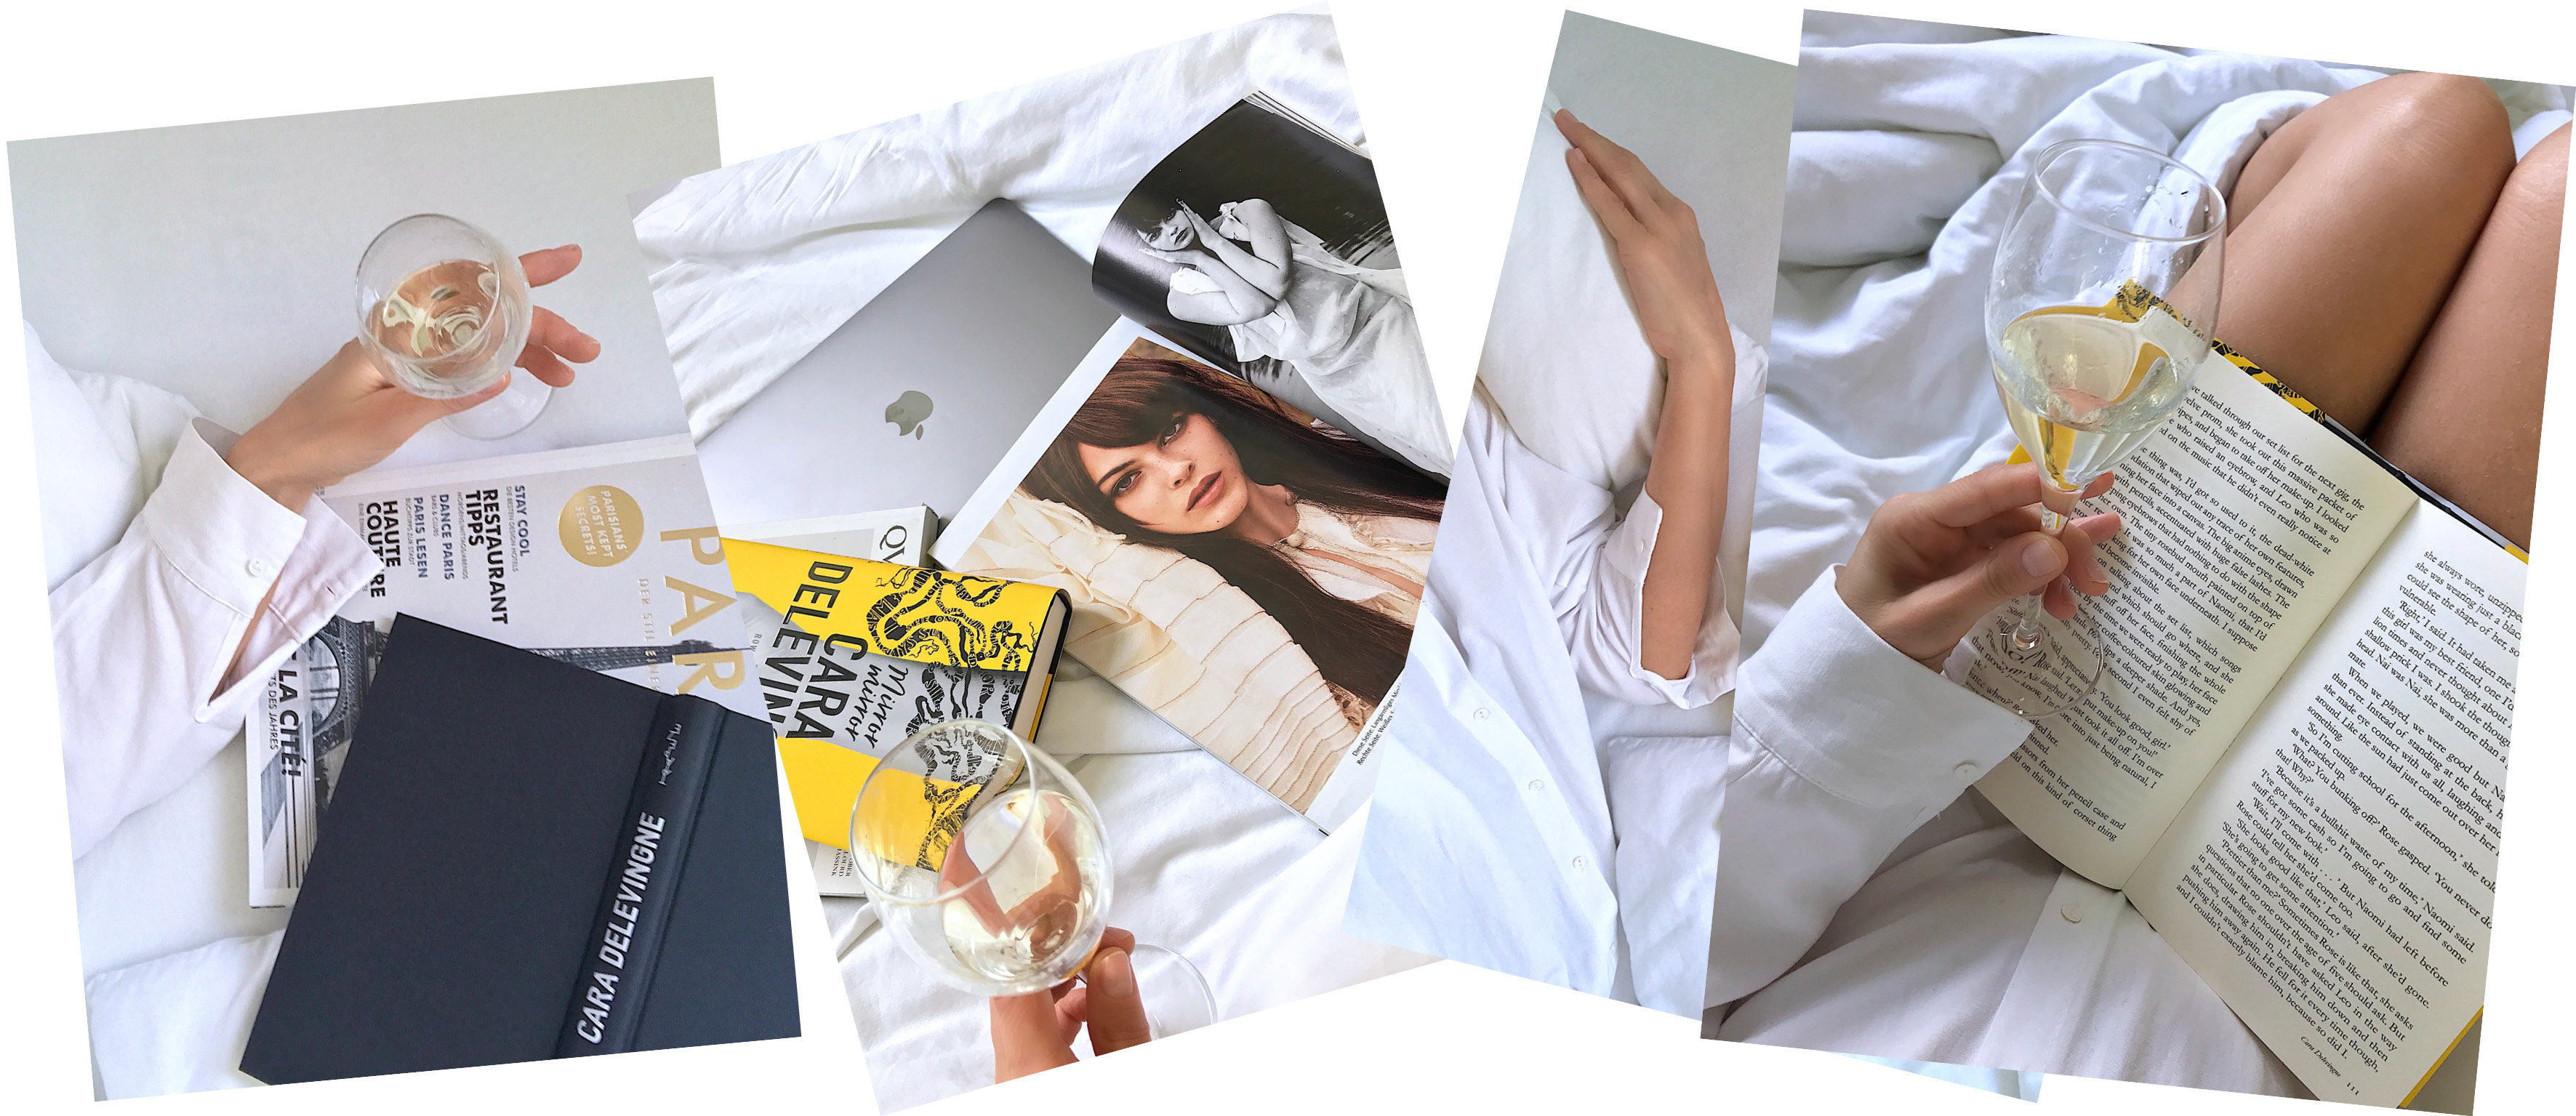 breakfast in bed collage moods glass of champagne holding in hand while reading a book white linen white shirt